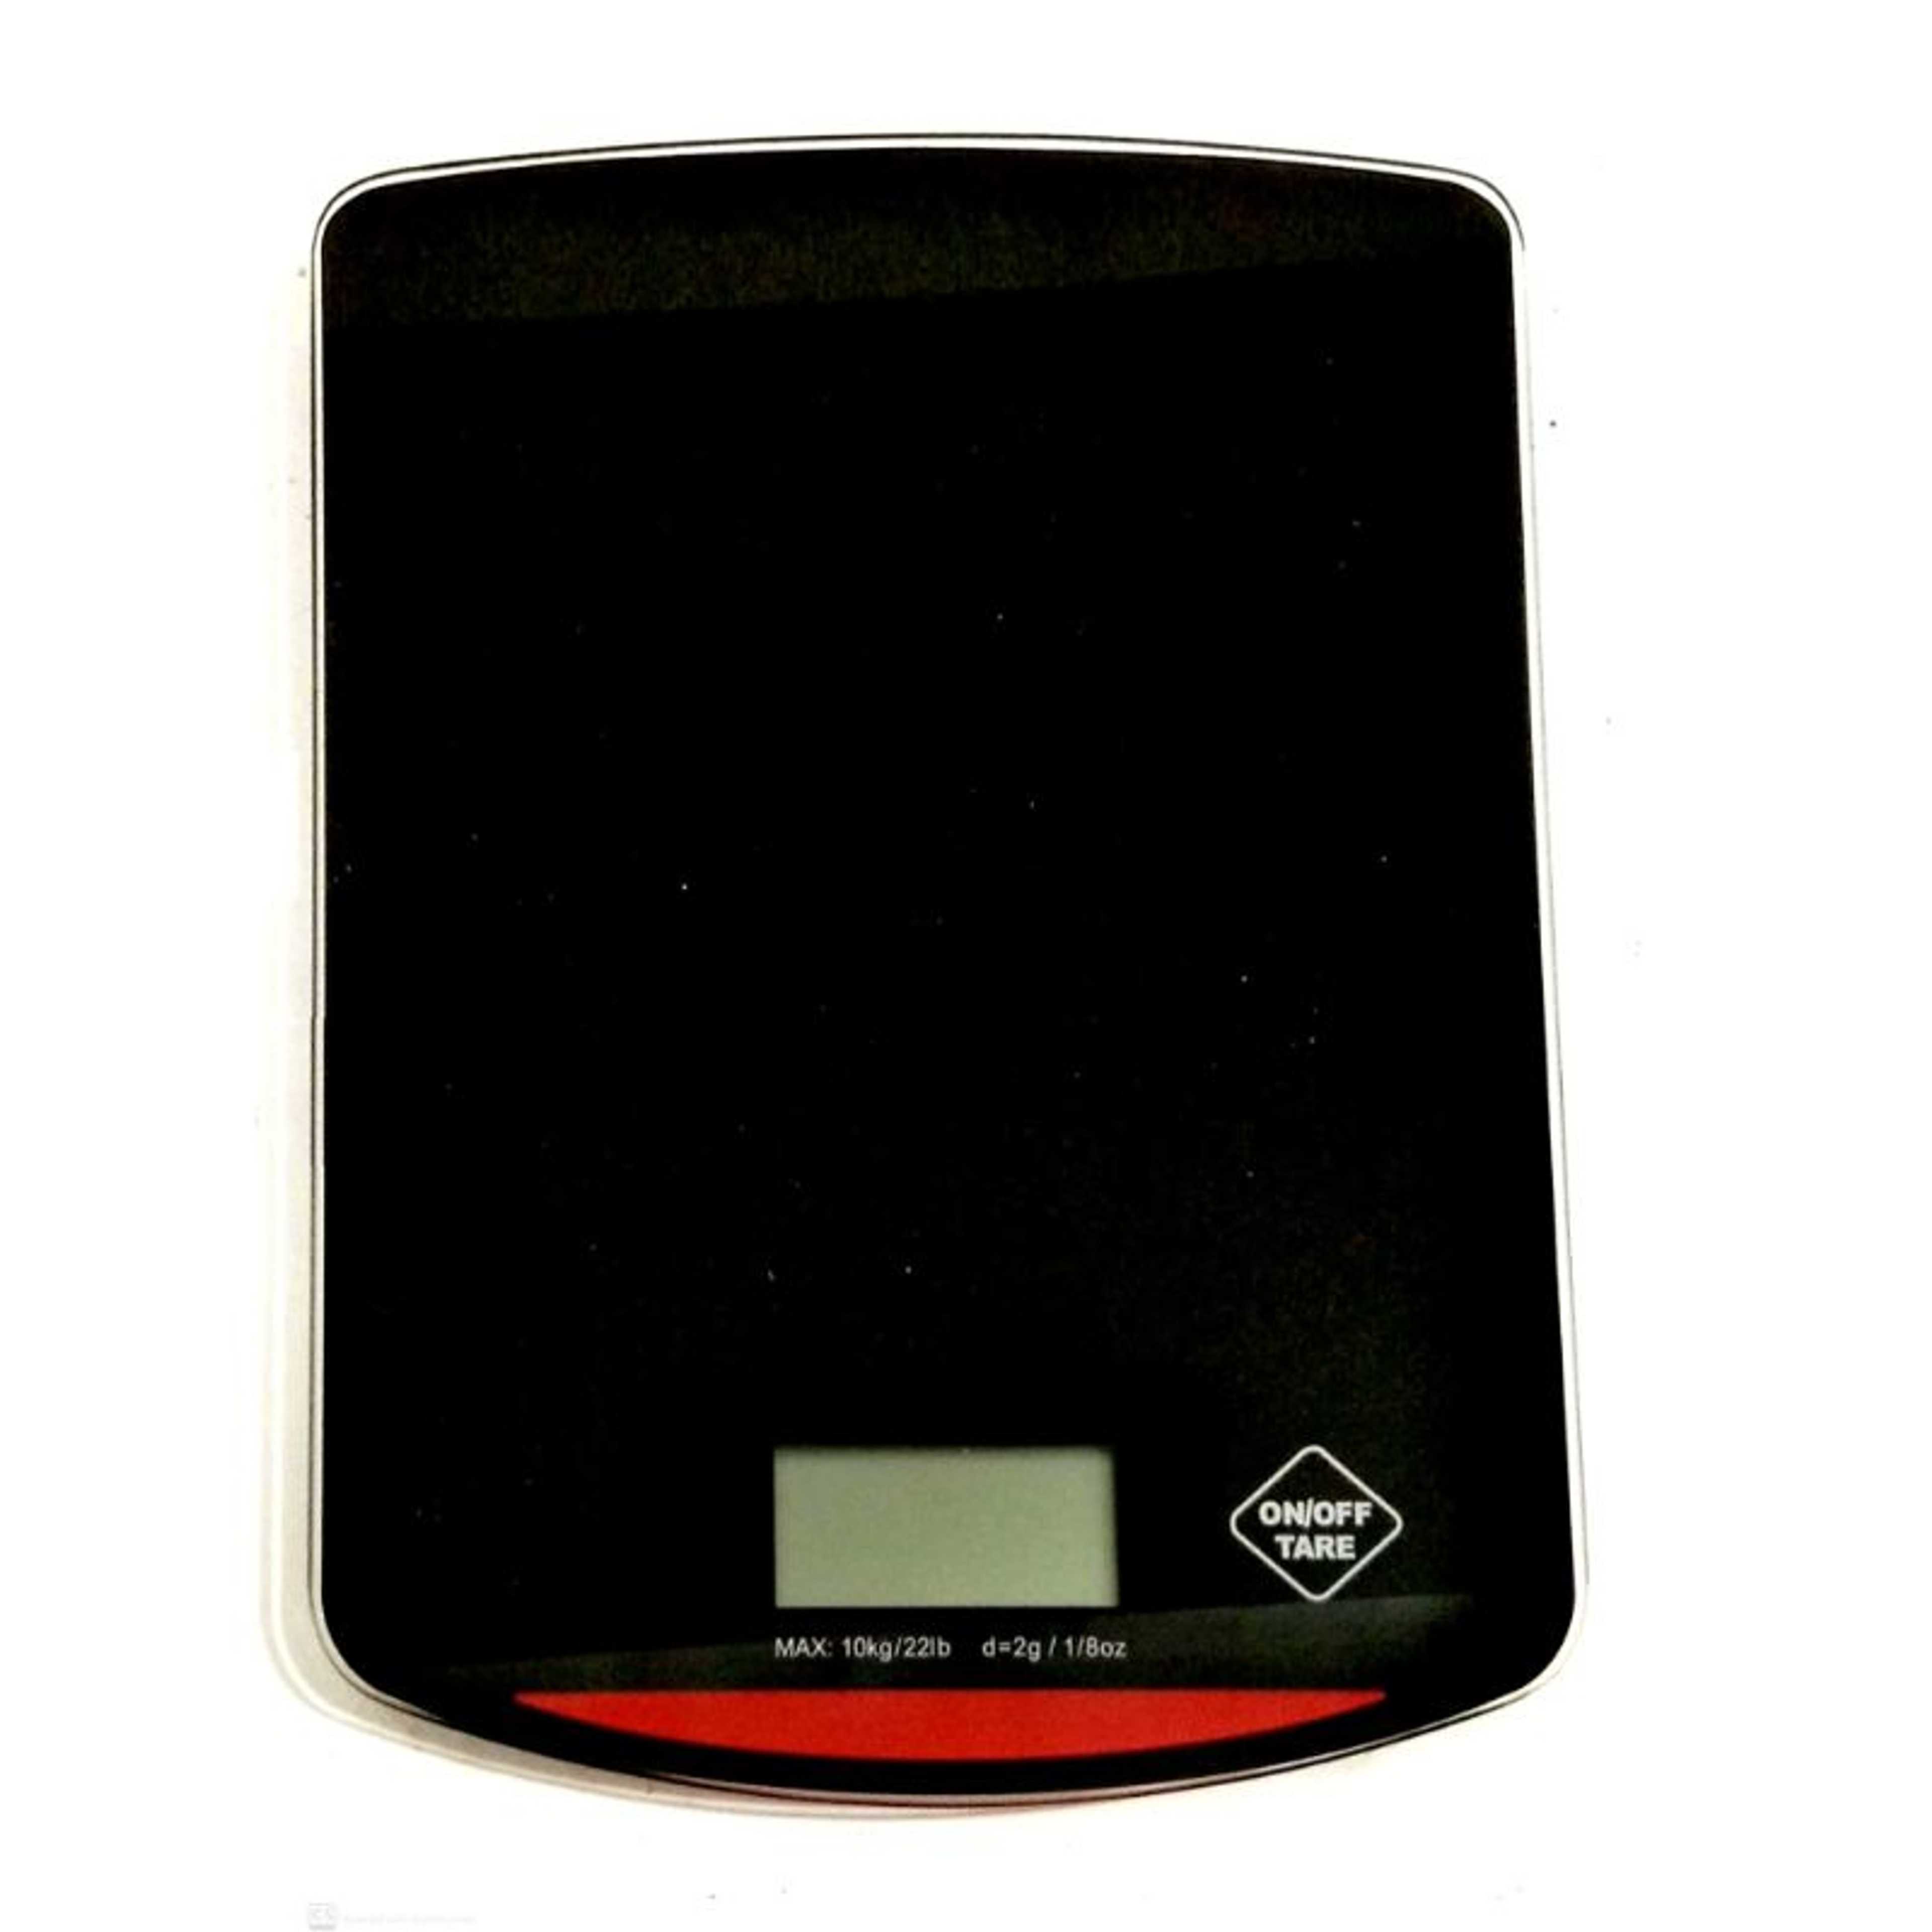 LCD Digital Display Professional Electronic Kitchen/Jewelry Weighting Scale - 10 Kg Capacity